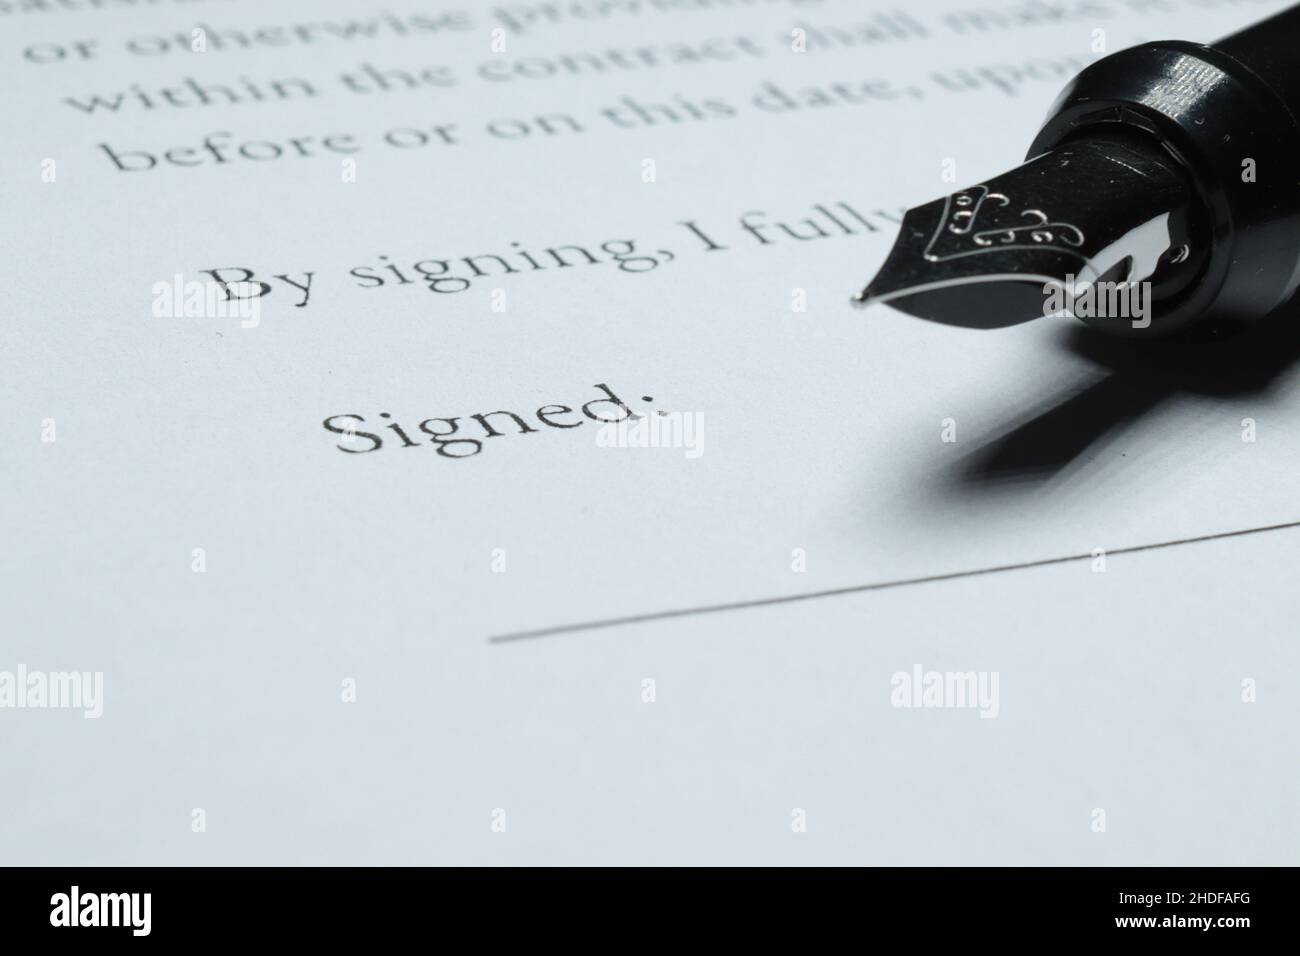 Fountain Pen placed next to signature blank Stock Photo